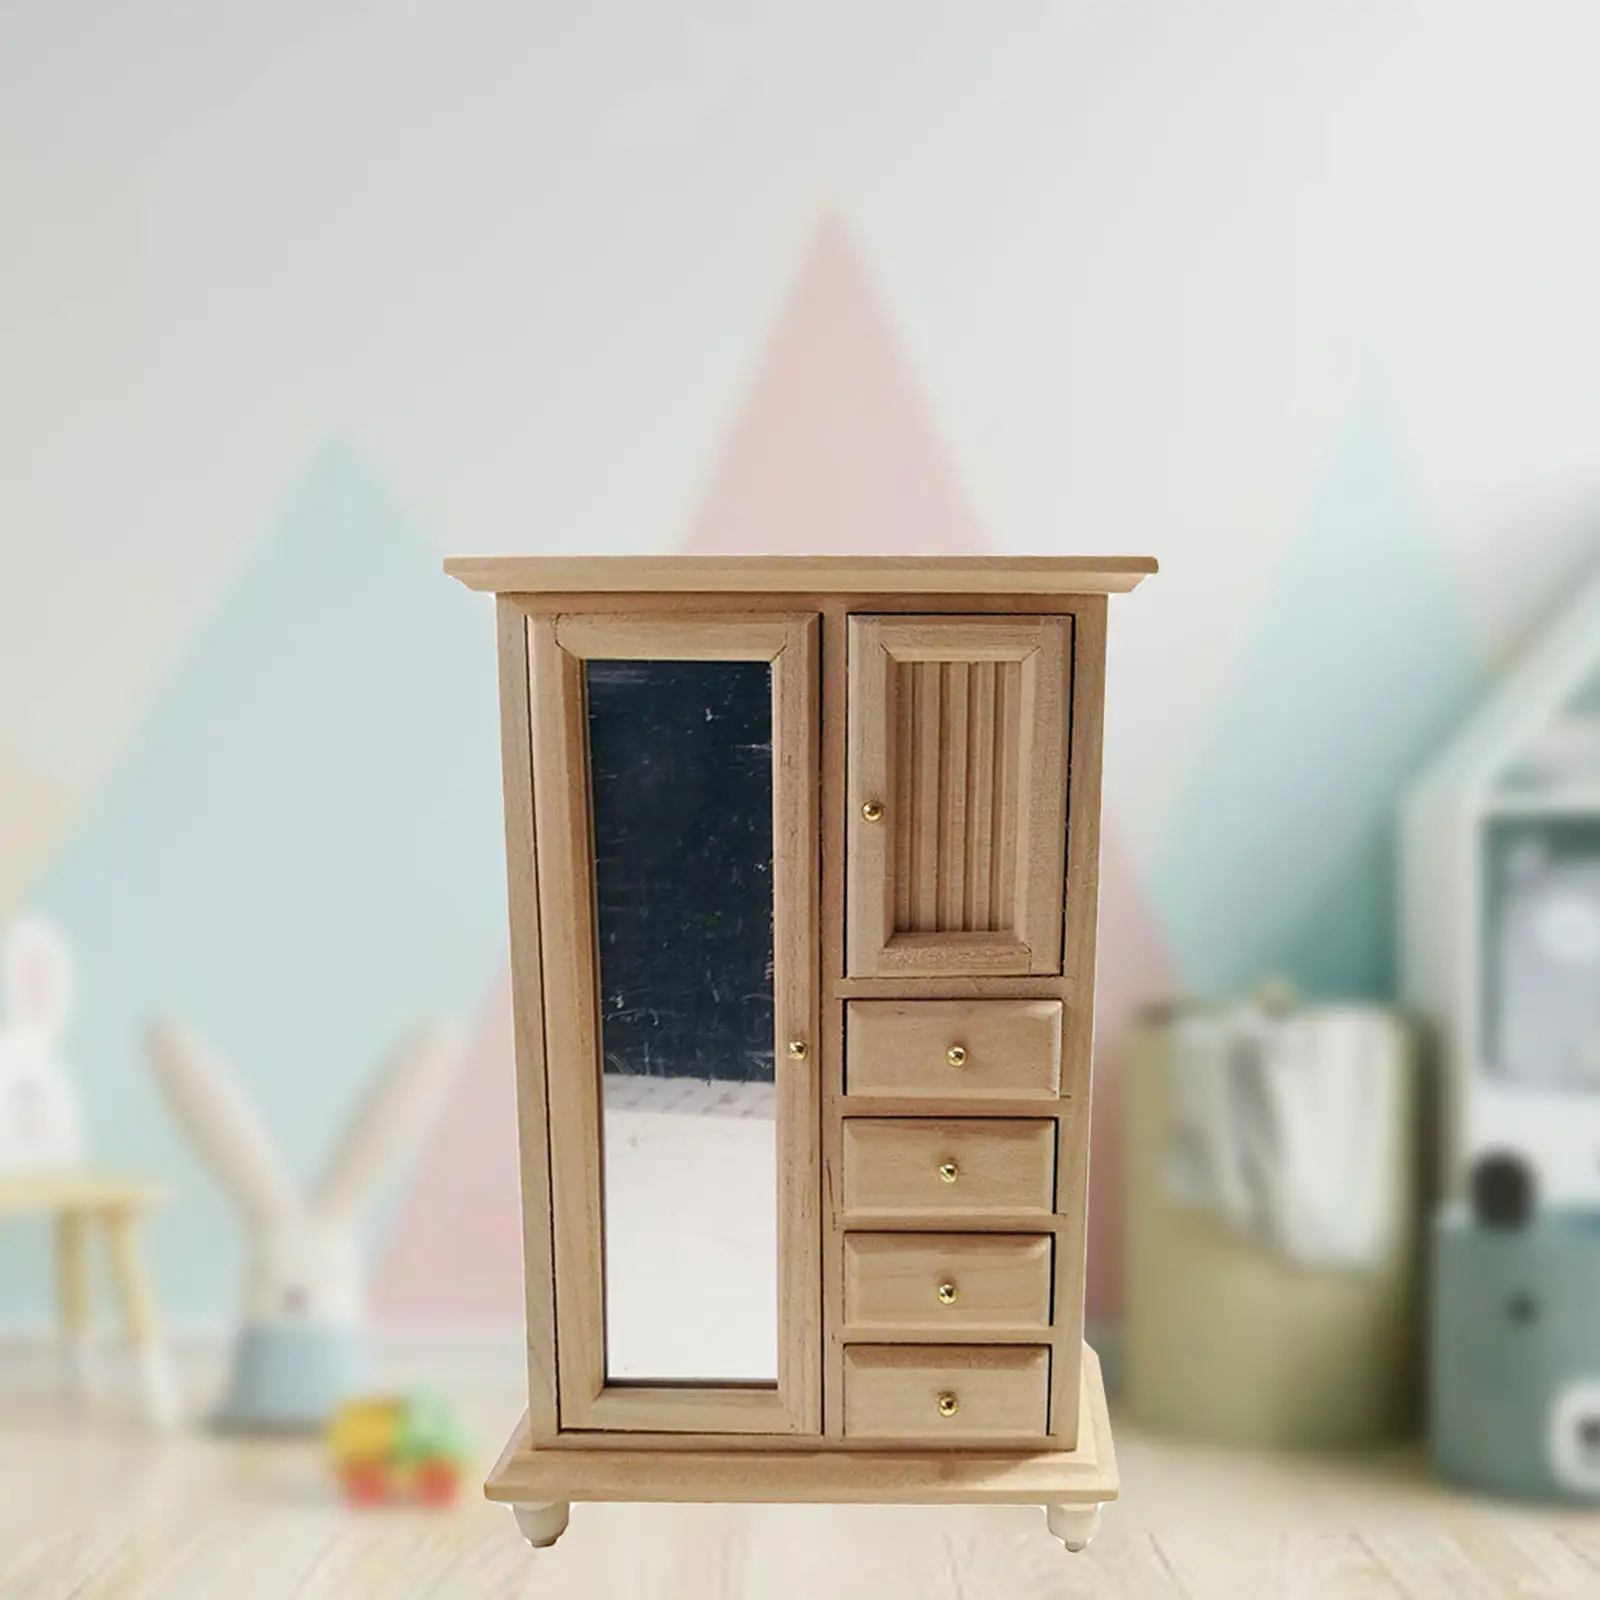 Dollhouse Furniture Decoration 4 Drawers Cabinet Miniature 1:12 for Bed Room